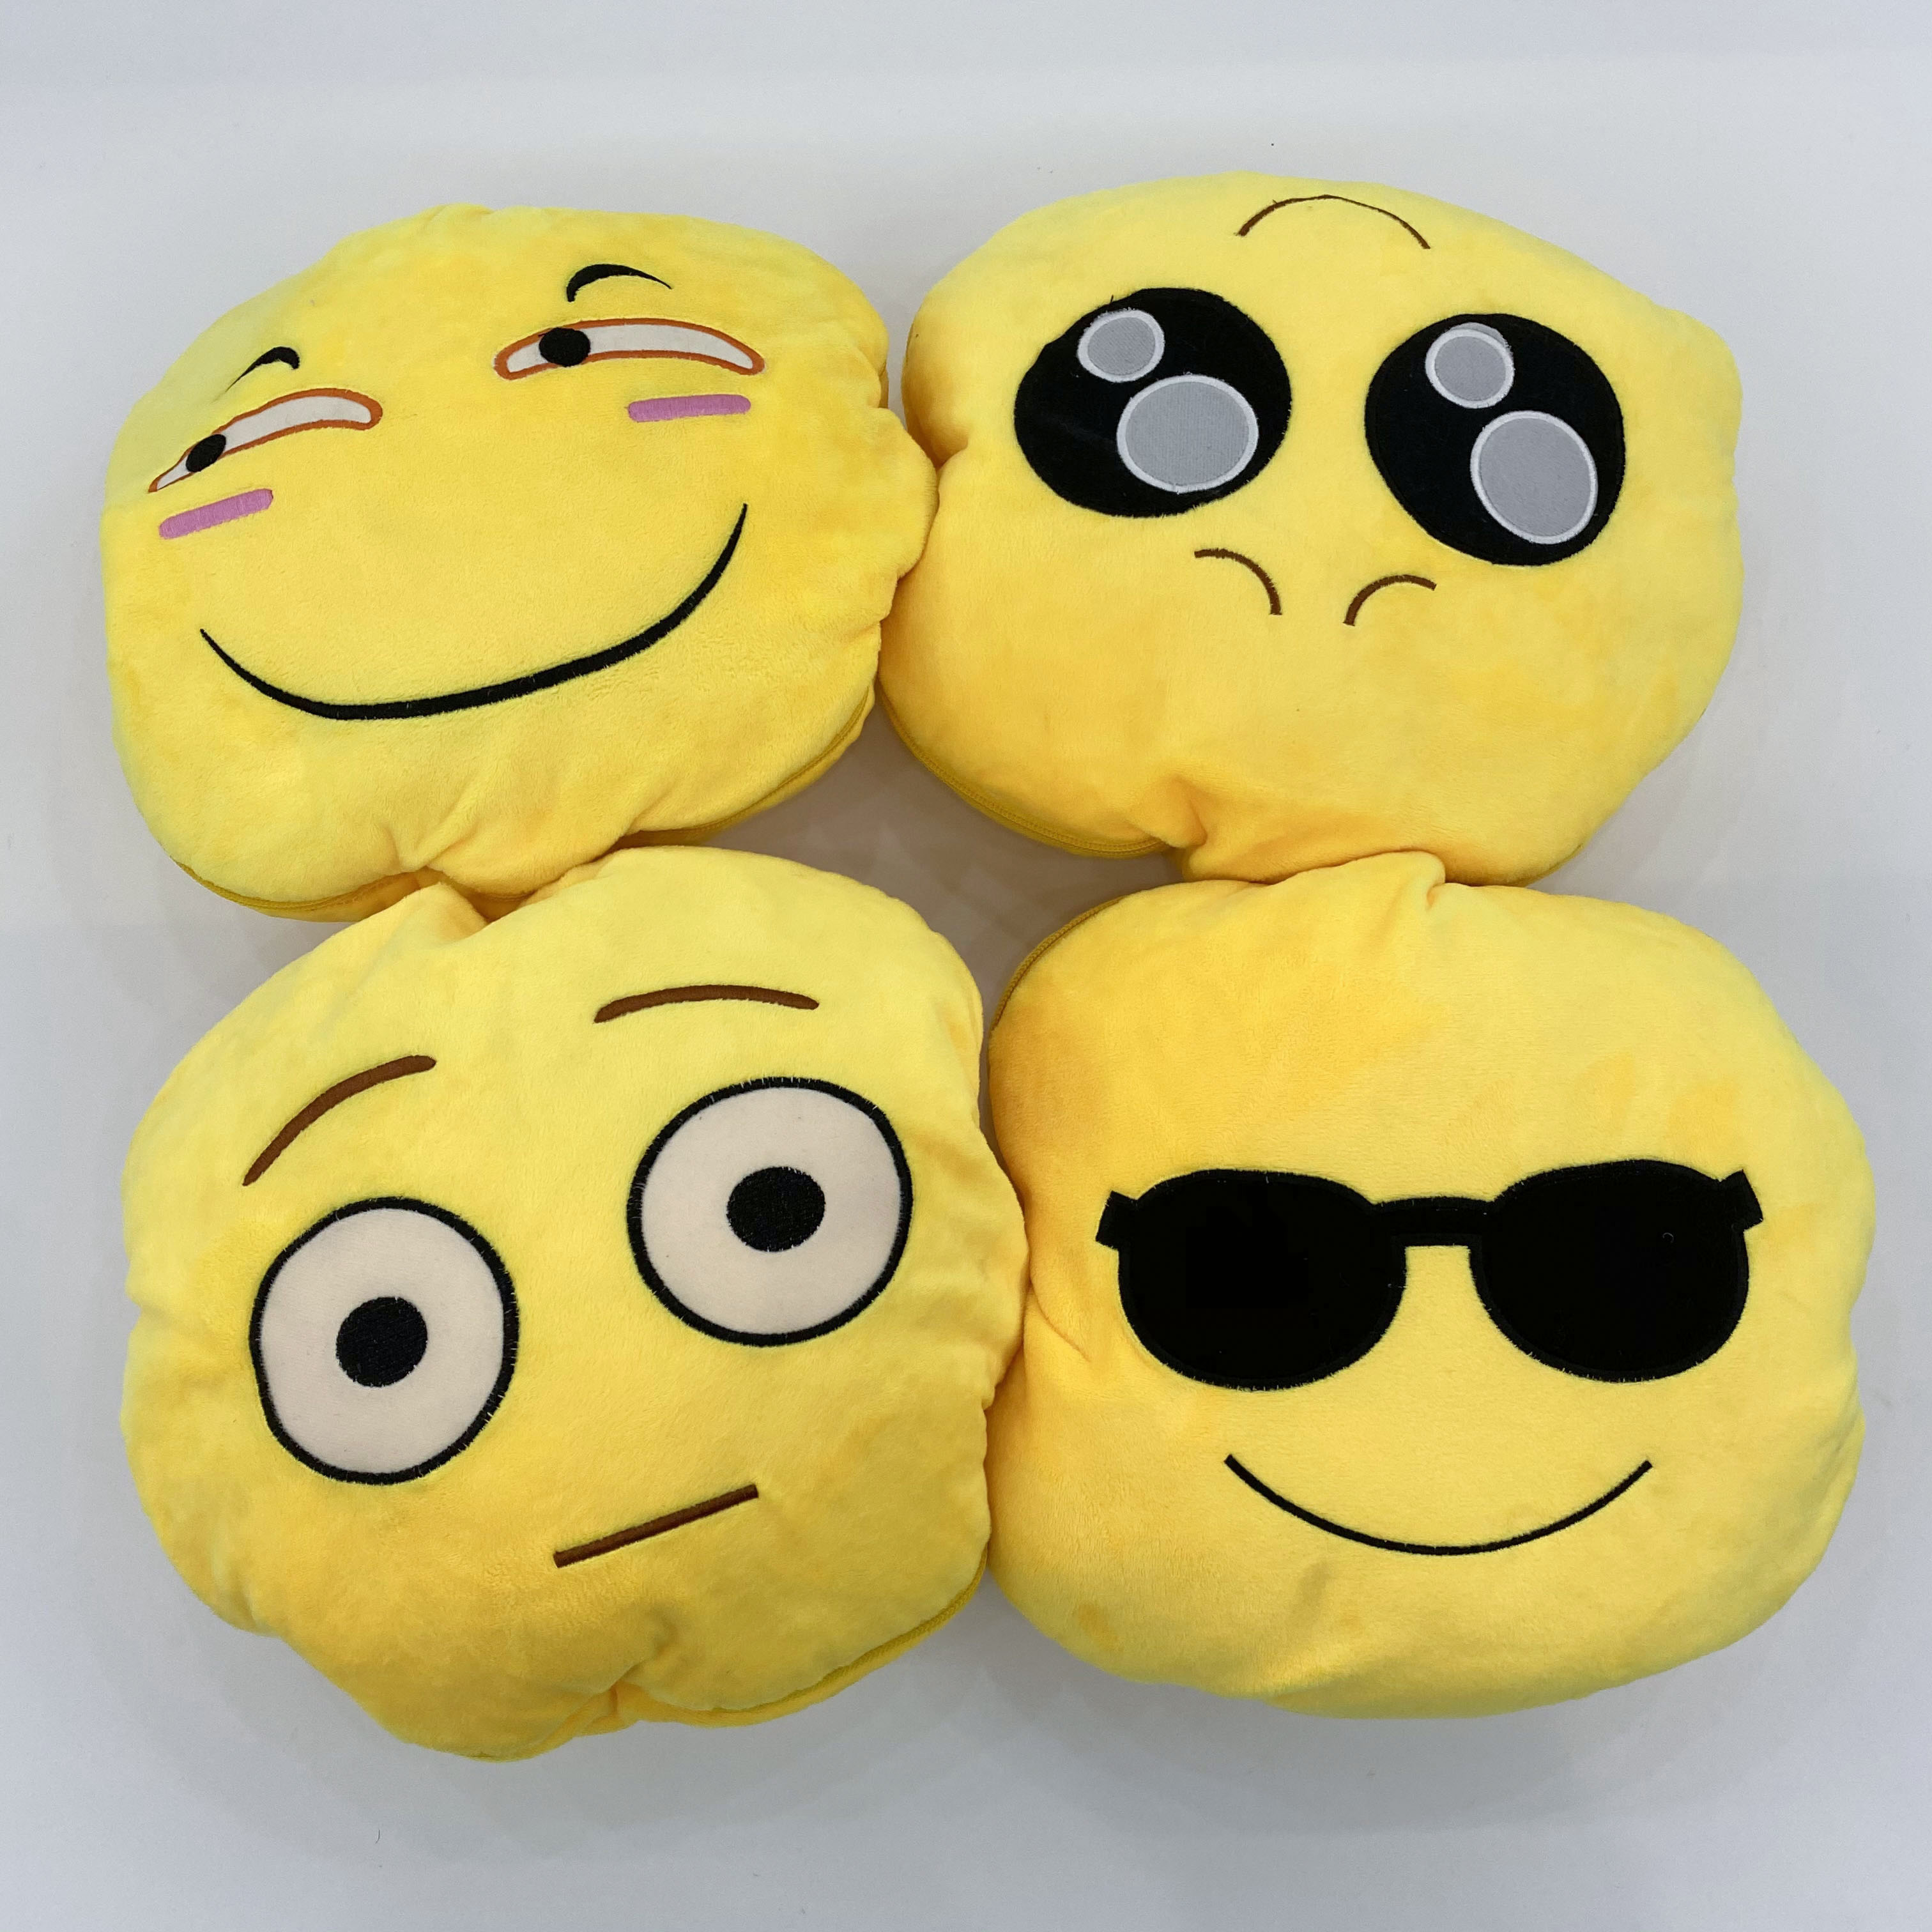 Cheap Emoticons Coral Fleece Travel 2 in 1 blanket And Pillow Set wholesale 